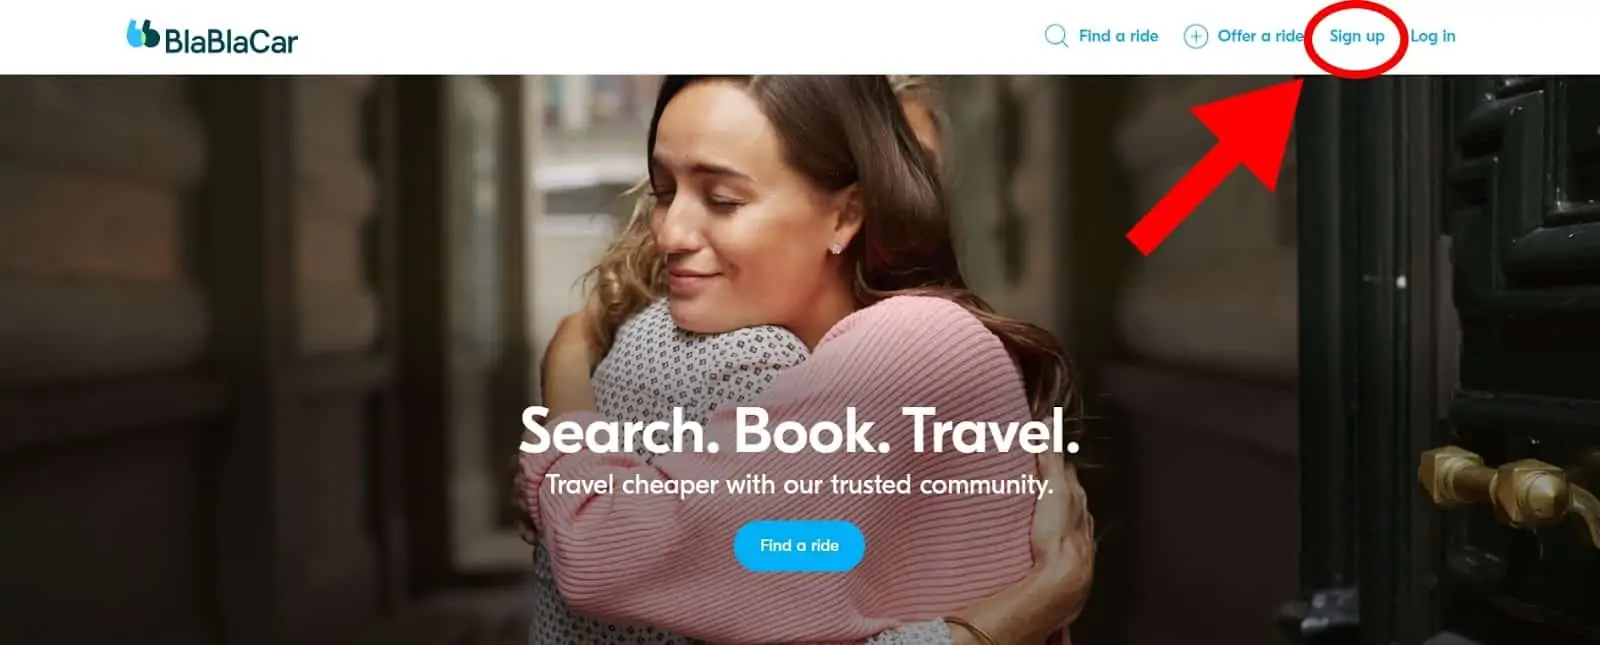 The BlaBlaCar home page with an arrow pointing to the "sign up" menu